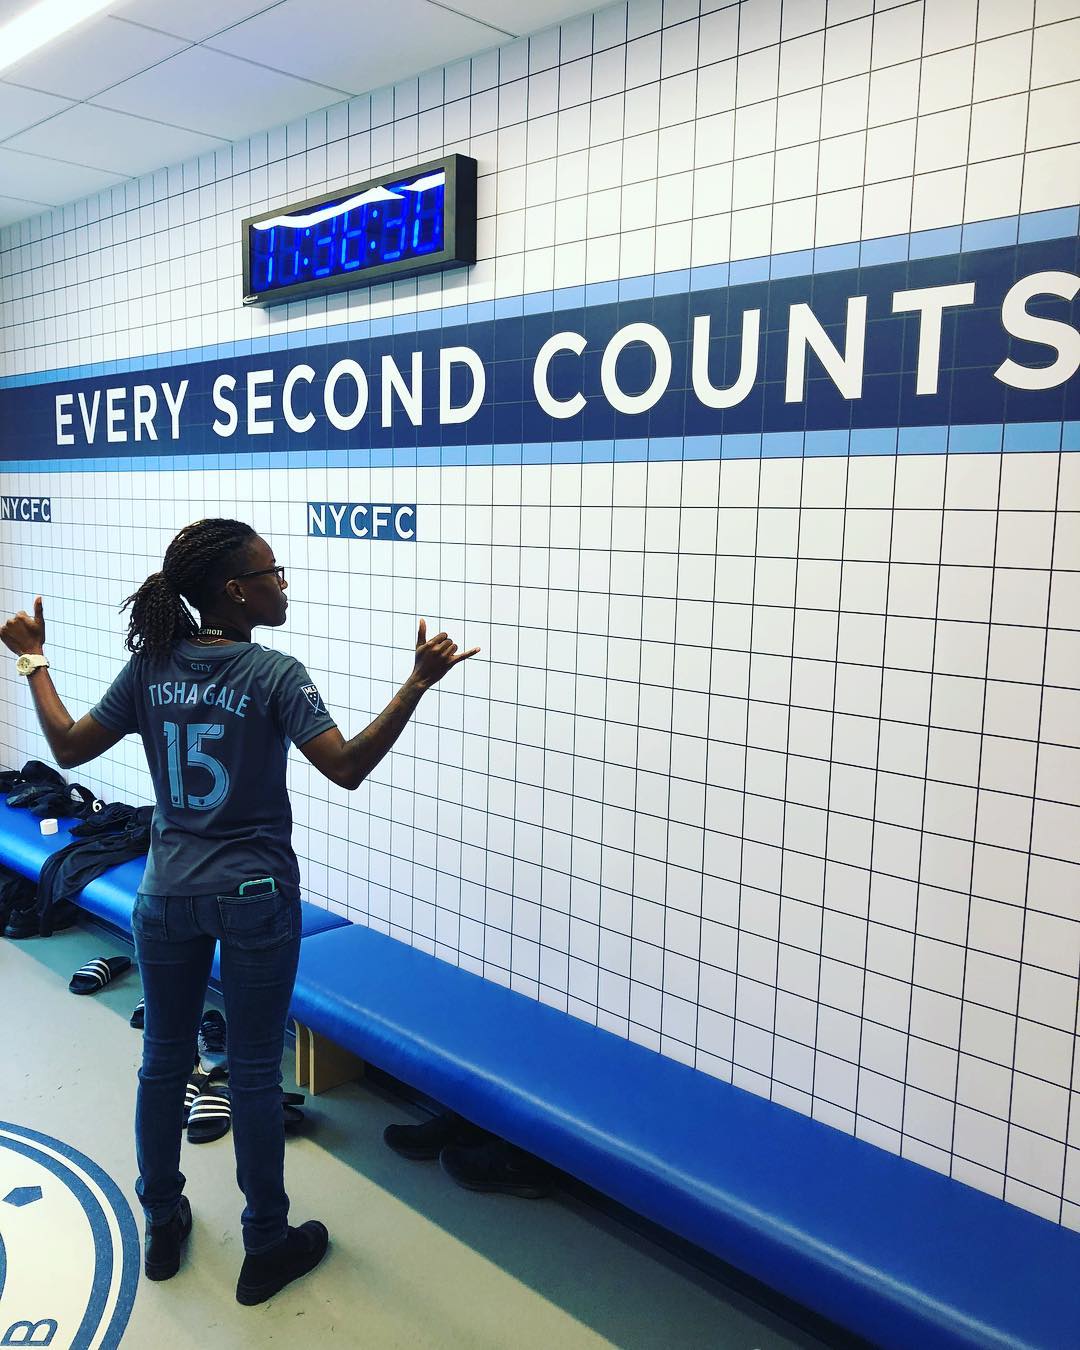 Every second counts🤙🏾 💙 #nycfc